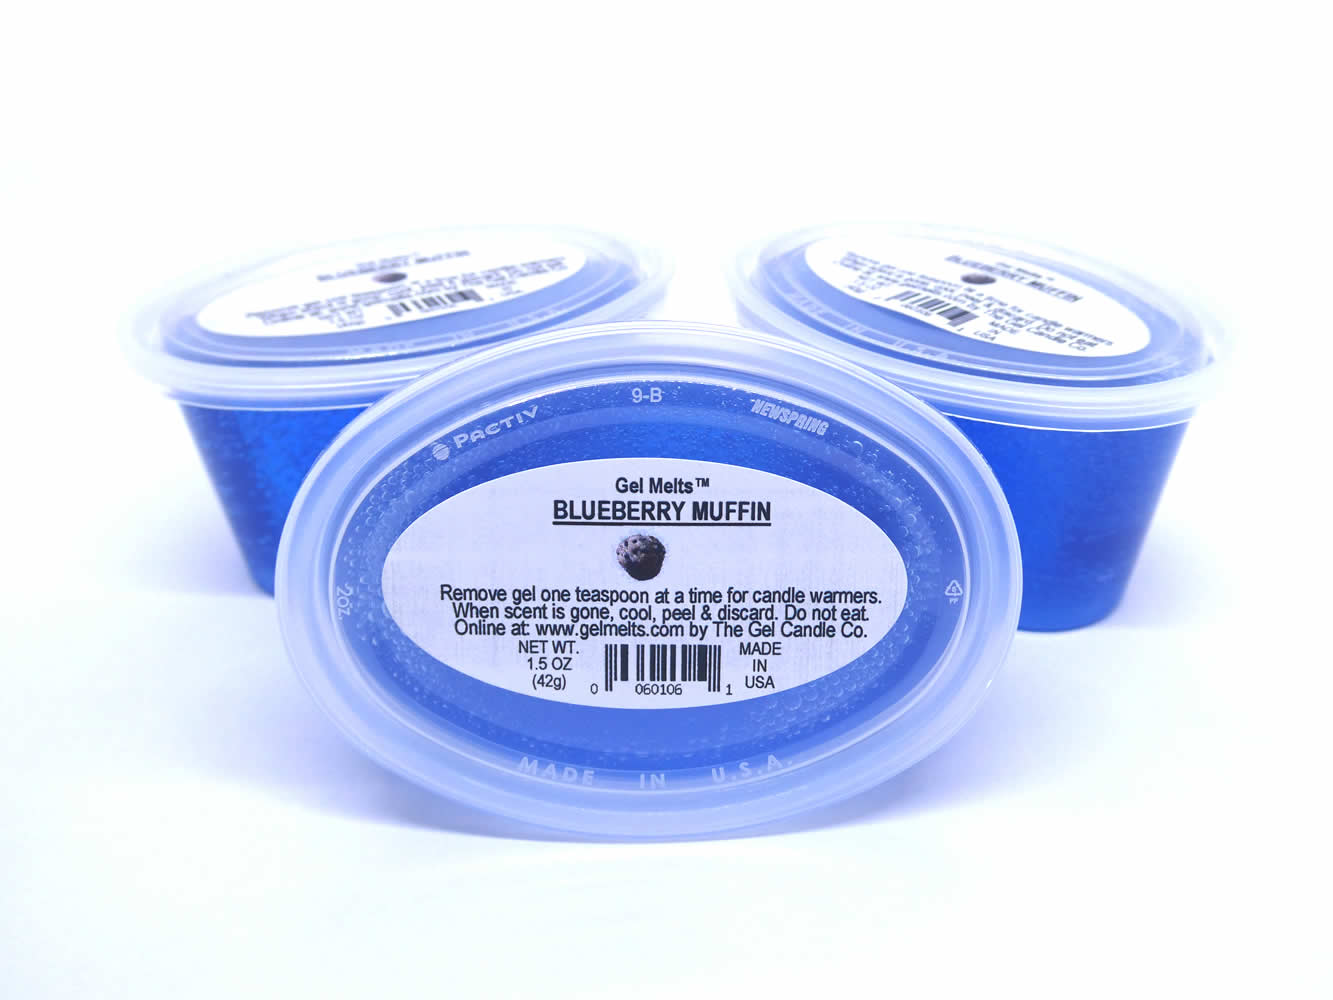 Blueberry Muffin scented Gel Melts™ Gel Wax for warmers - 3 pack [412] :  The Gel Candle Co, Scented Gel Candles for Sale Retail and Wholesale